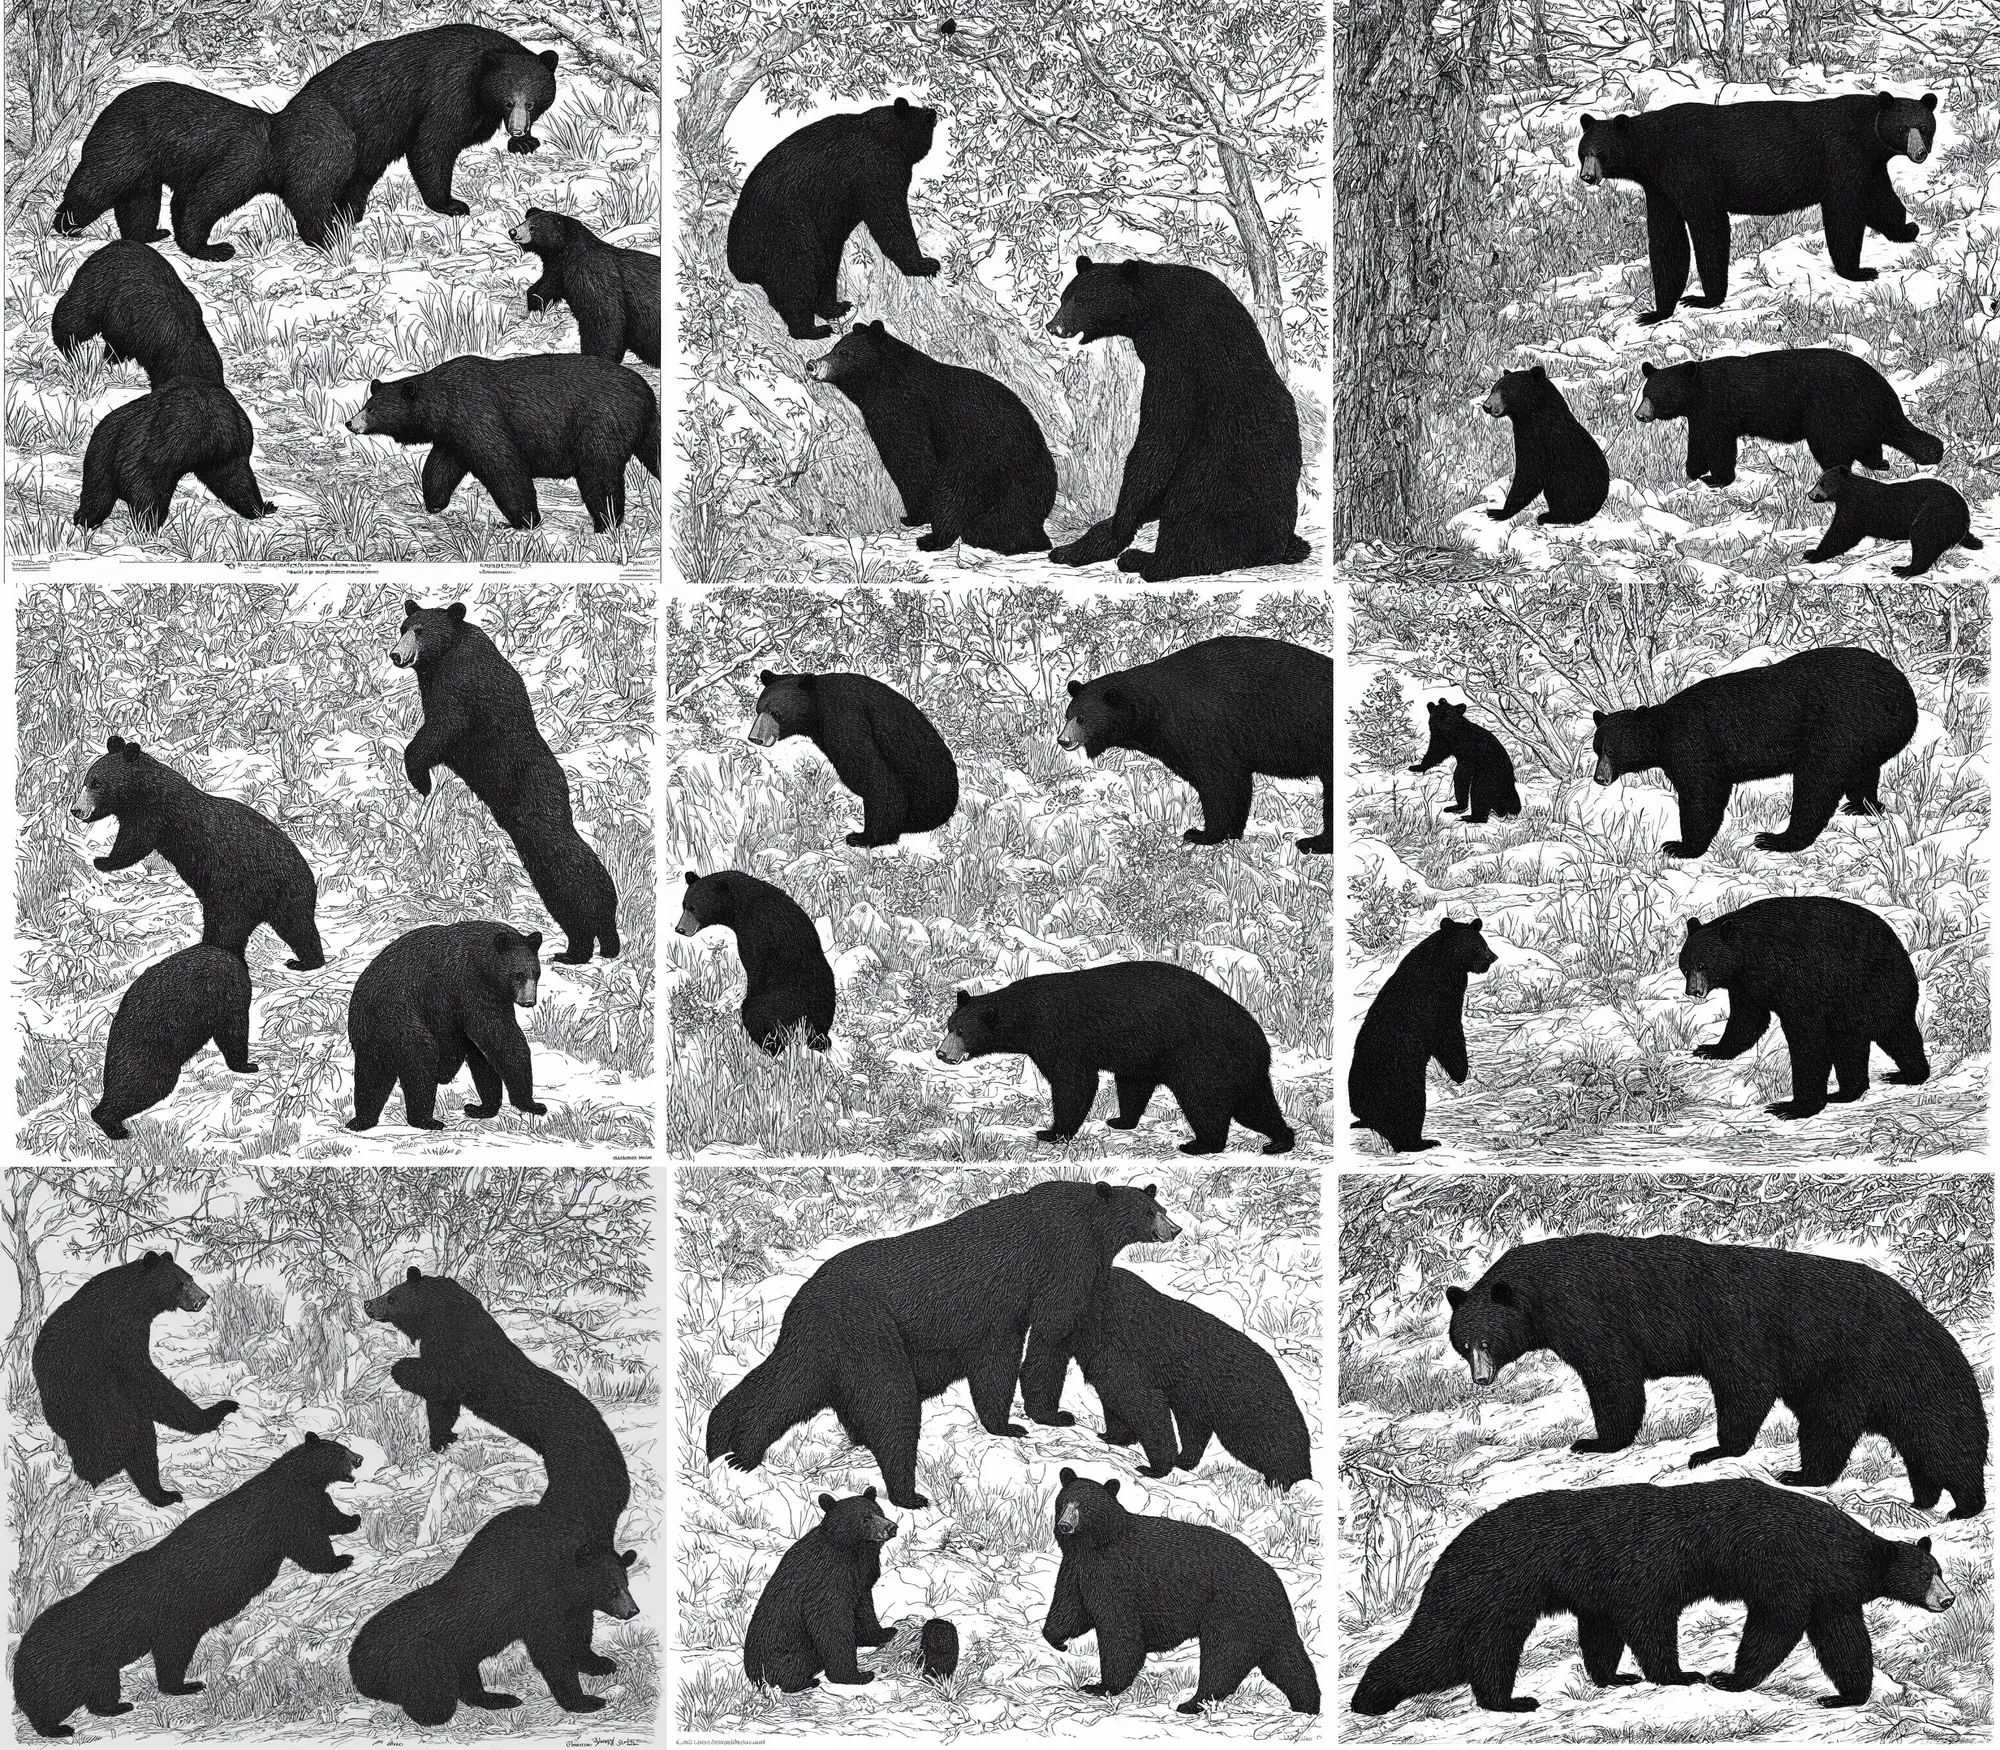 Prompt: one individual black bear, by Currier and Ives, coloring book page, black and white, pen & ink drawing